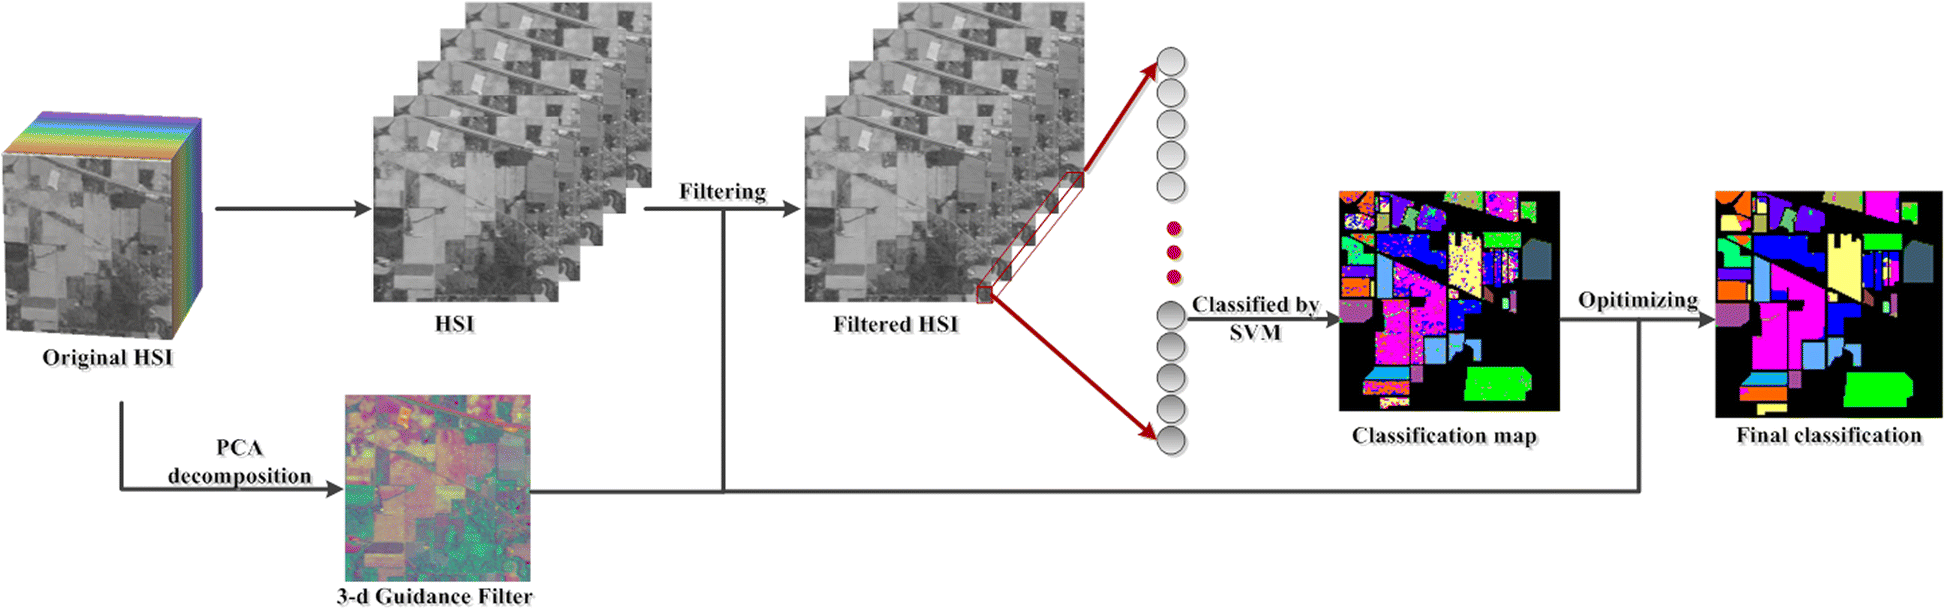 Hyperspectral image classification with SVM and guided filter ...